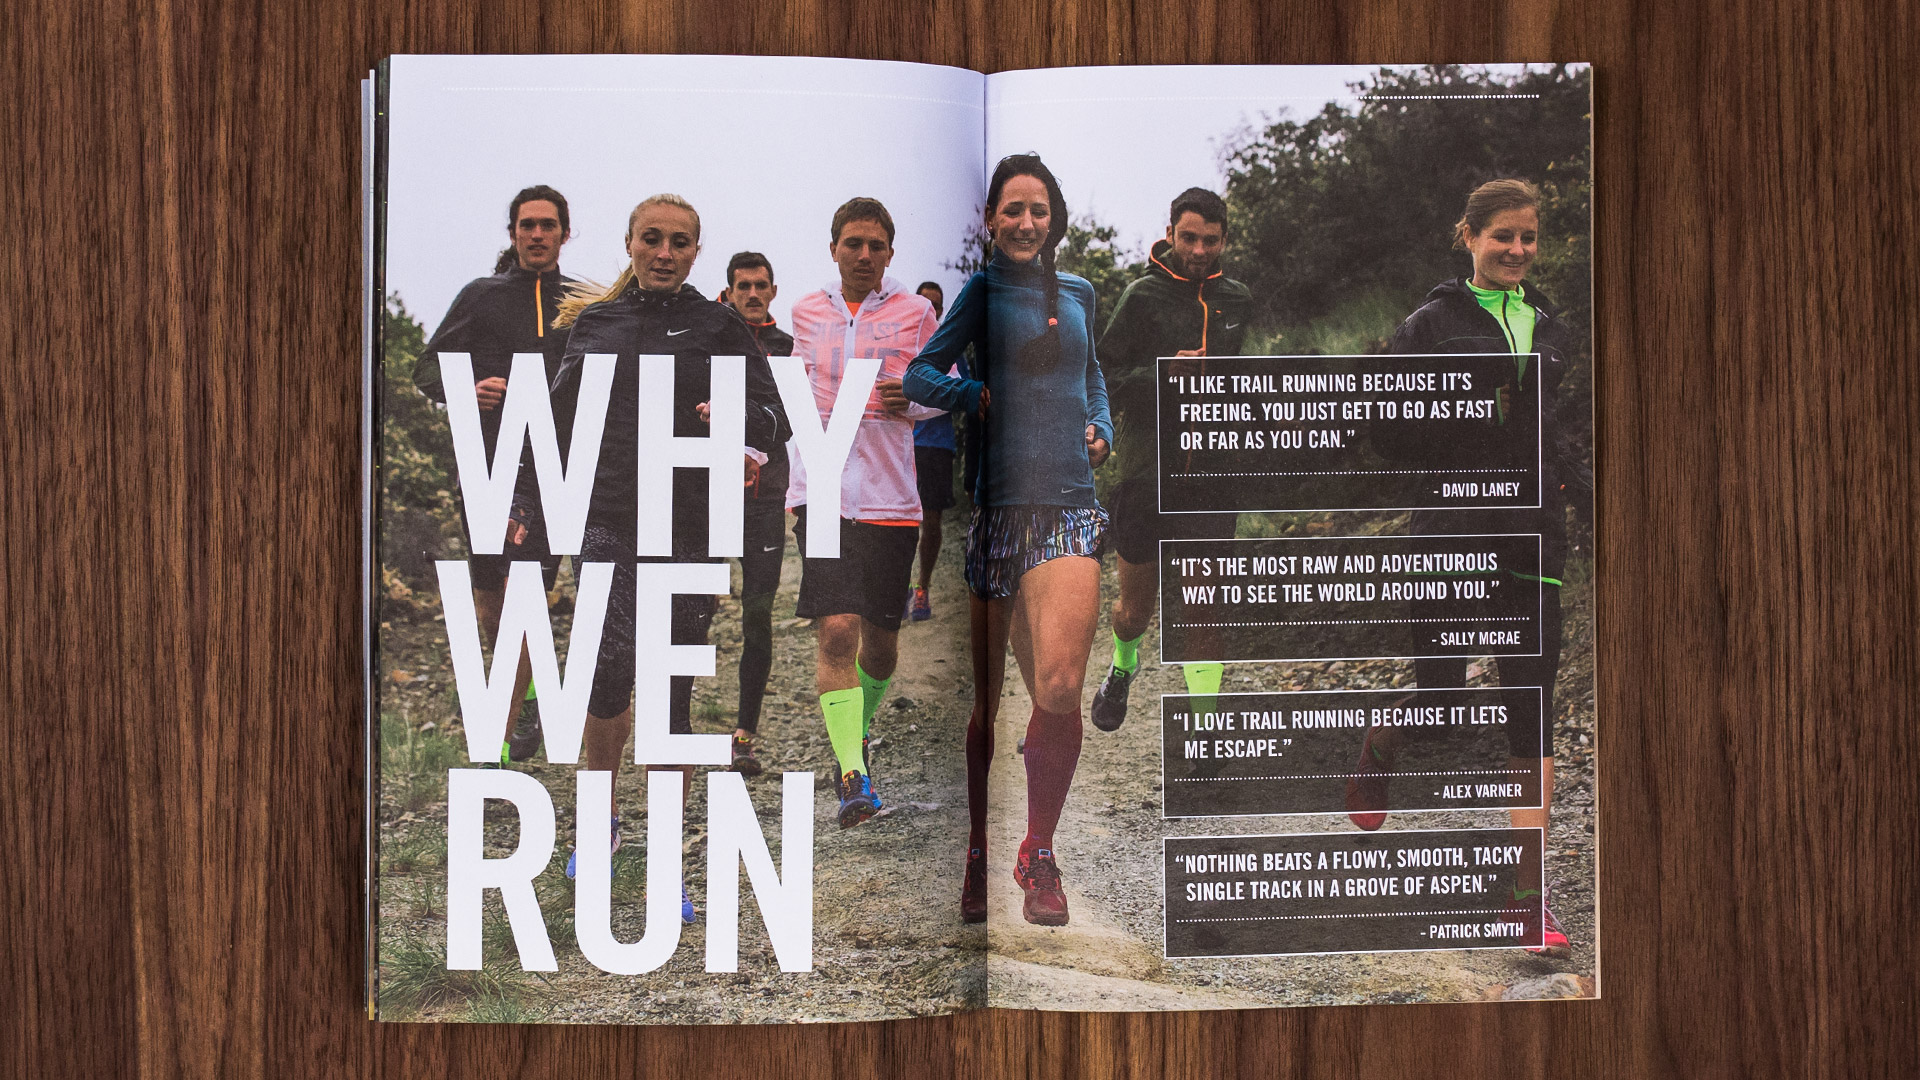 Nike Trail Running catalog spread design created by Incubate Design